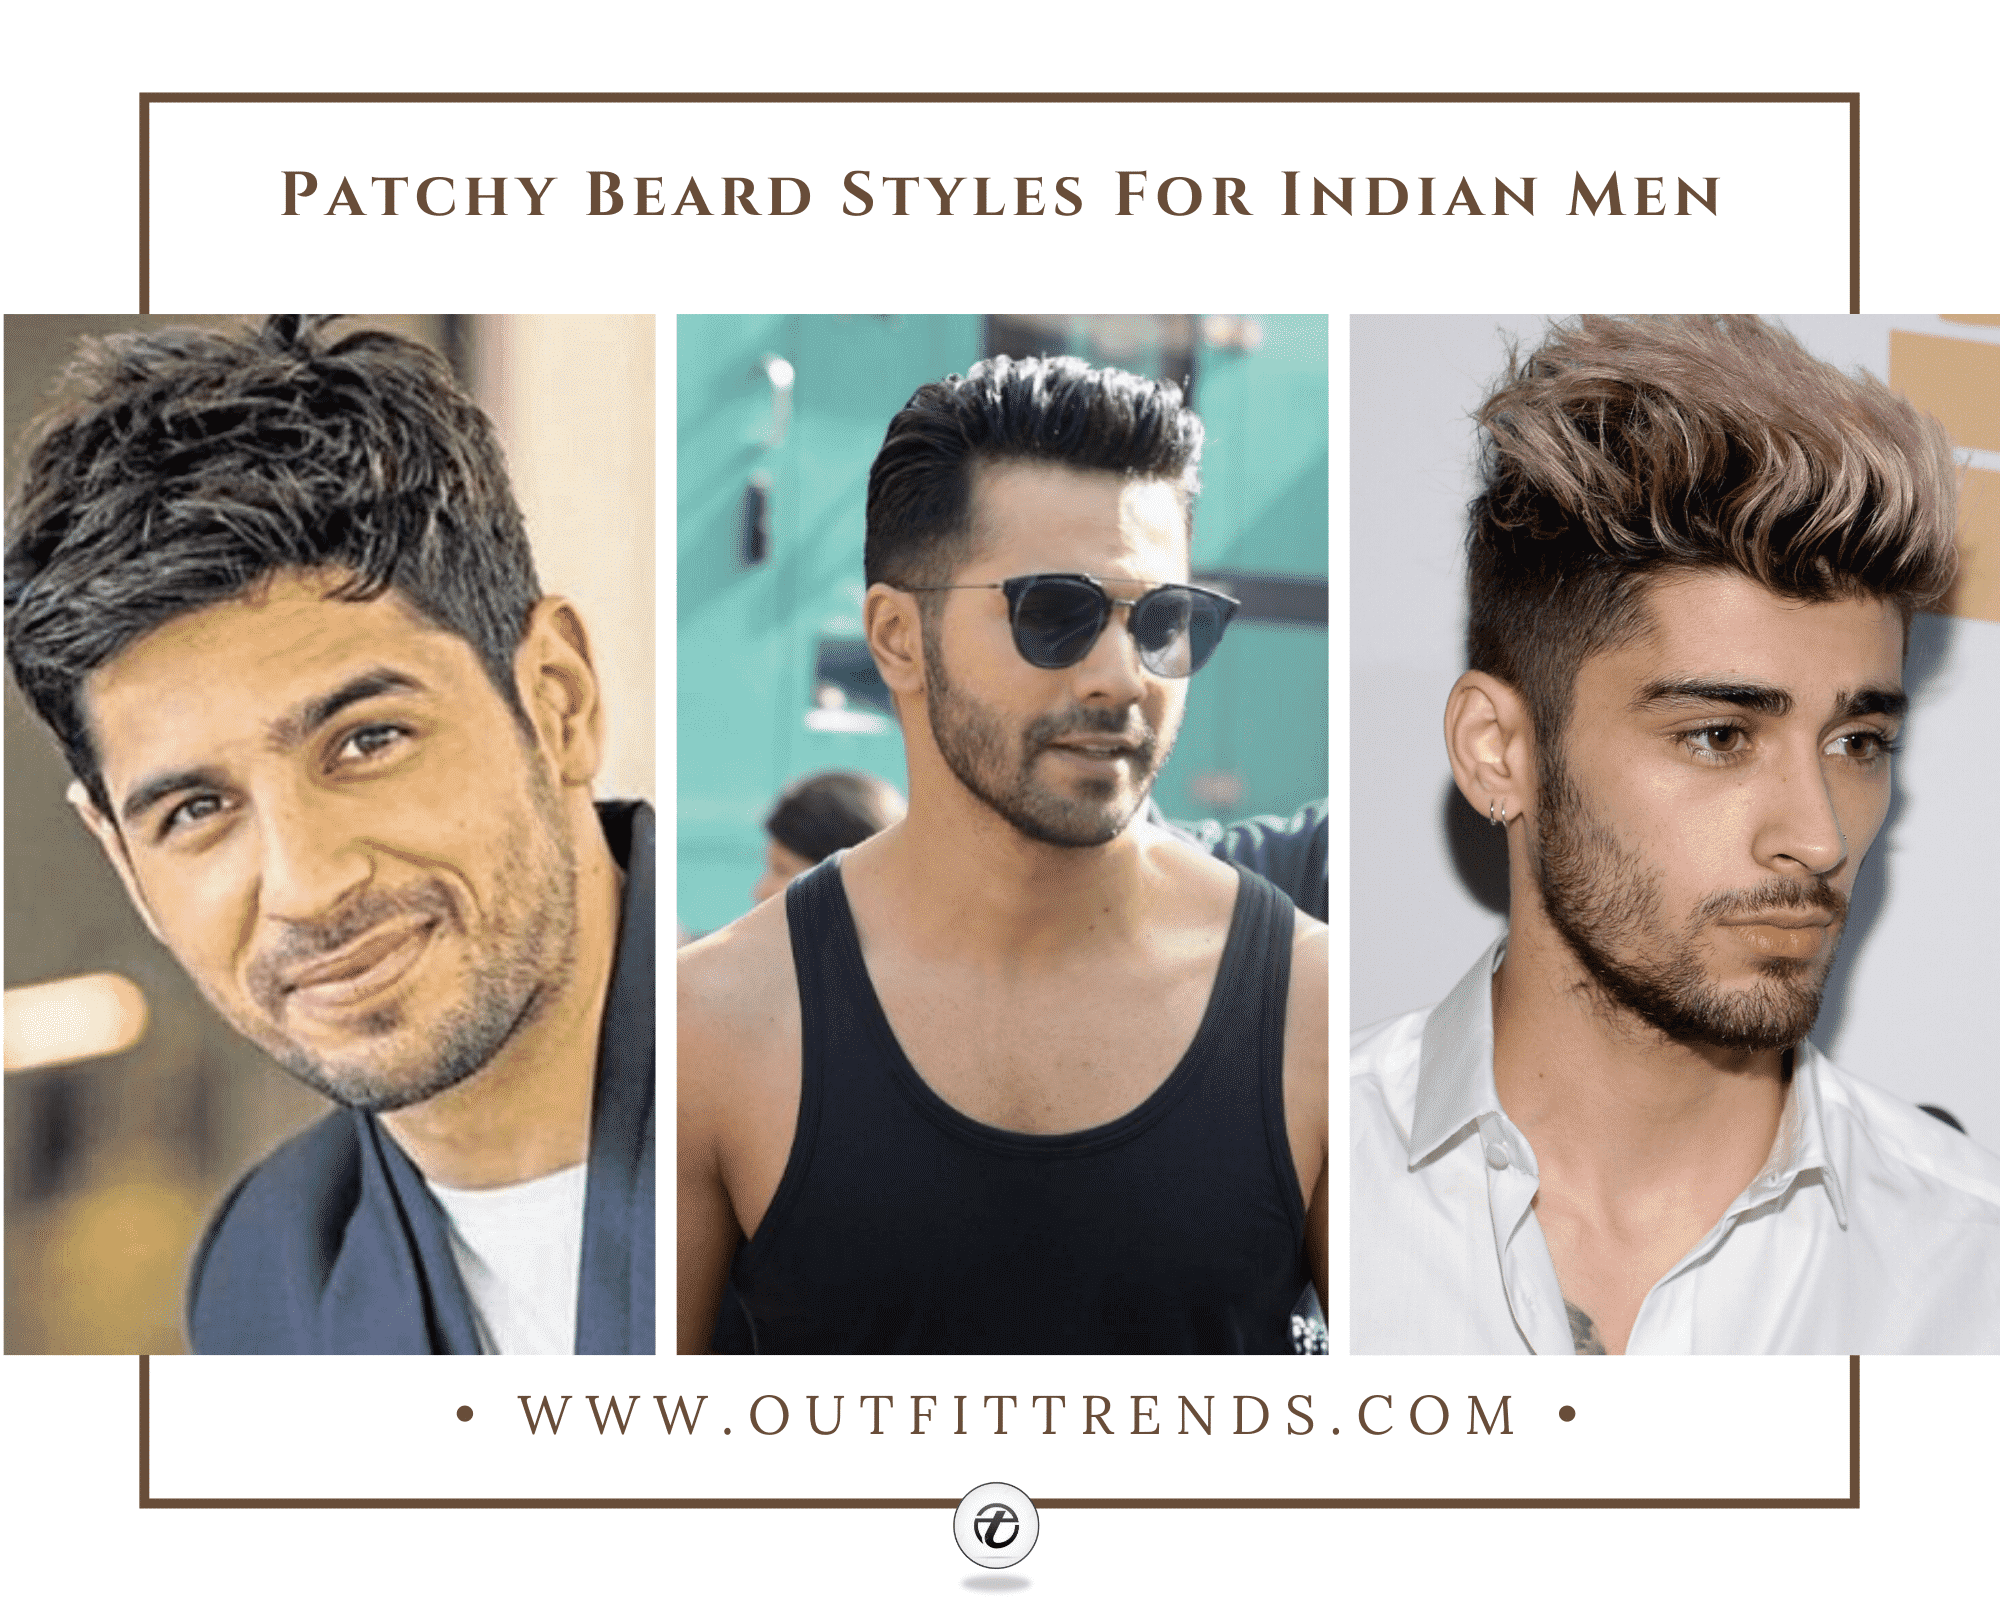 #20 Patchy Beard Styles For Indian Men | Tips & Styling Ideas's patchy beard styles